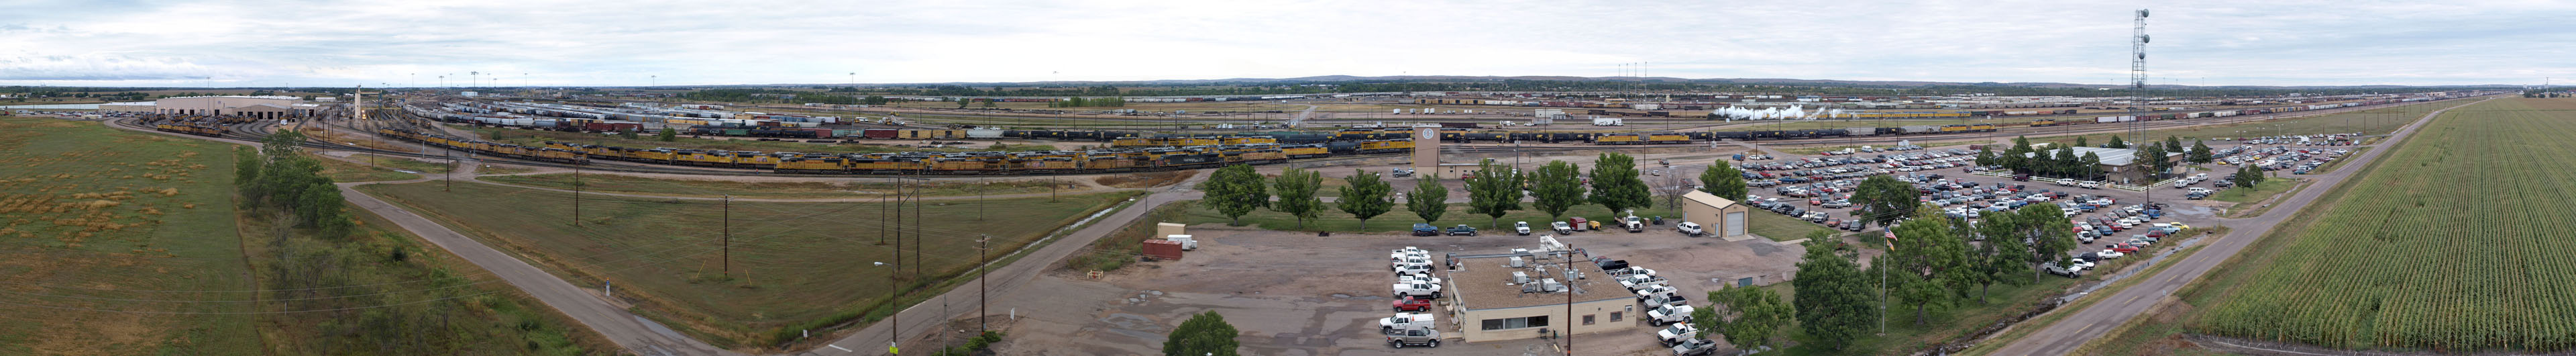 Bailey Yard from Golden Spike Tower, North Platte